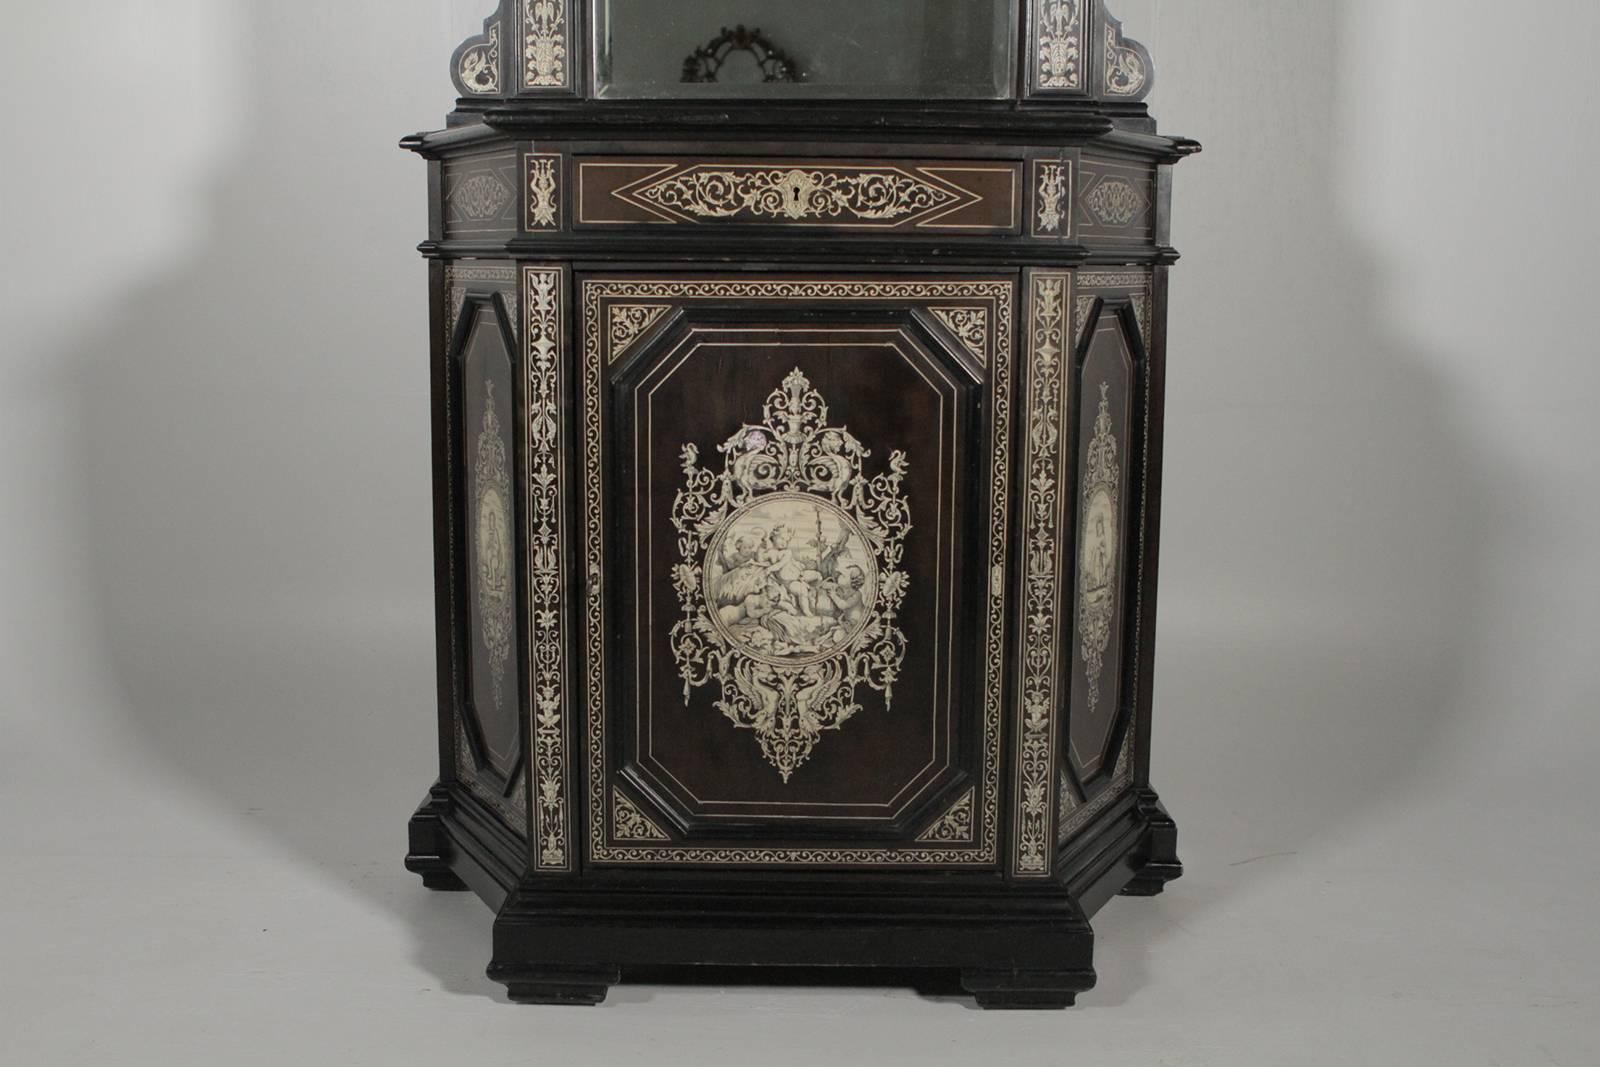 Late 19th century ebonized and inlaid cabinet with mirrored door. The top section with mirror the bottom with a cabinet doo that opens to reveal a single shelf. Impressive and elaborate inlay over ebony.